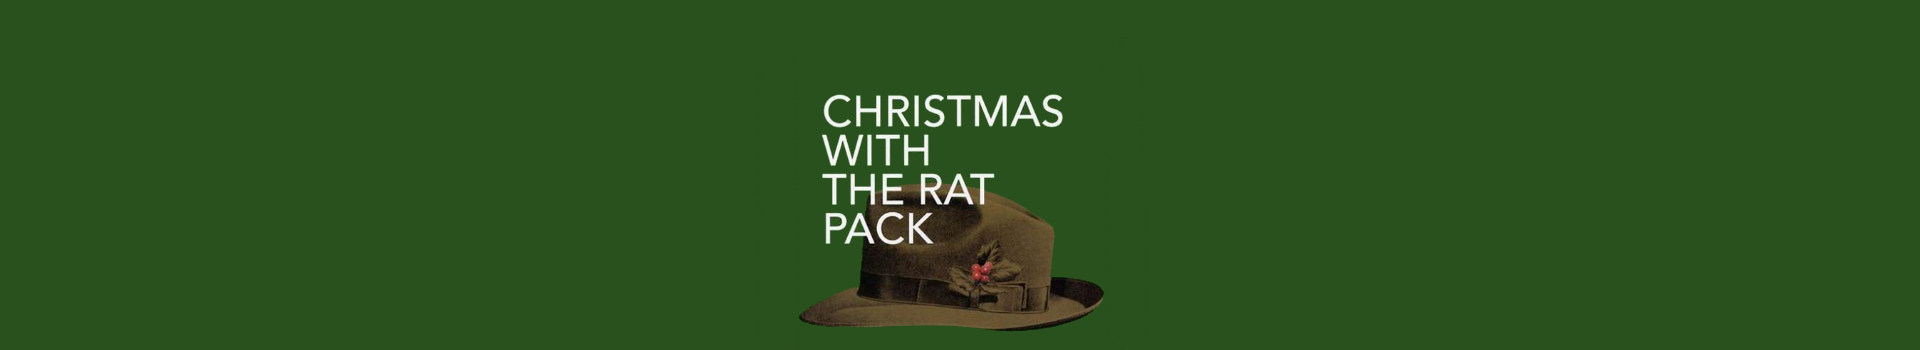 Christmas With The Rat Pack London Palladium tickets